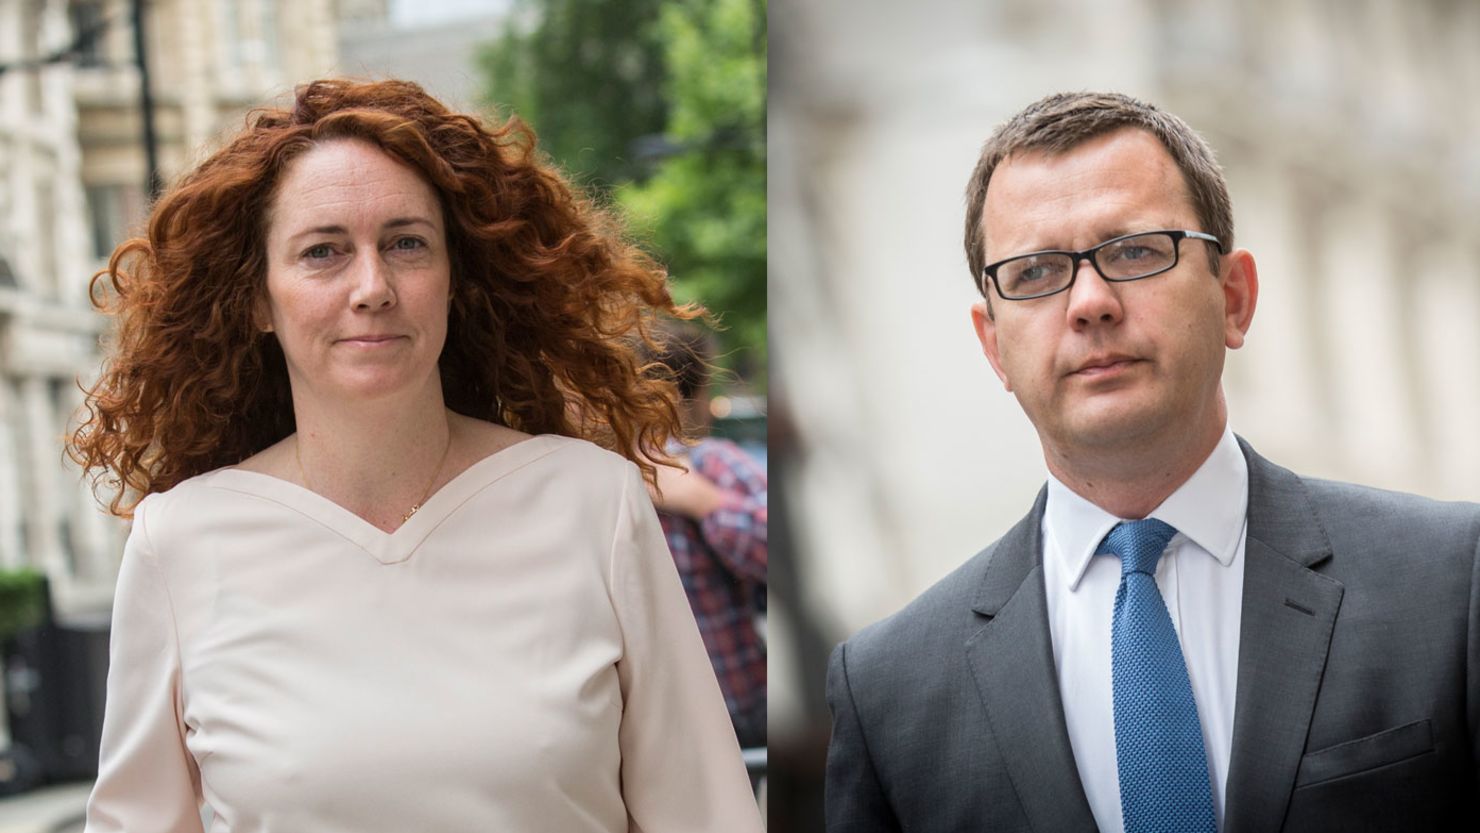 Rebekah Brooks, former News International chief executive, and ex-News of the World editor Andy Coulson.